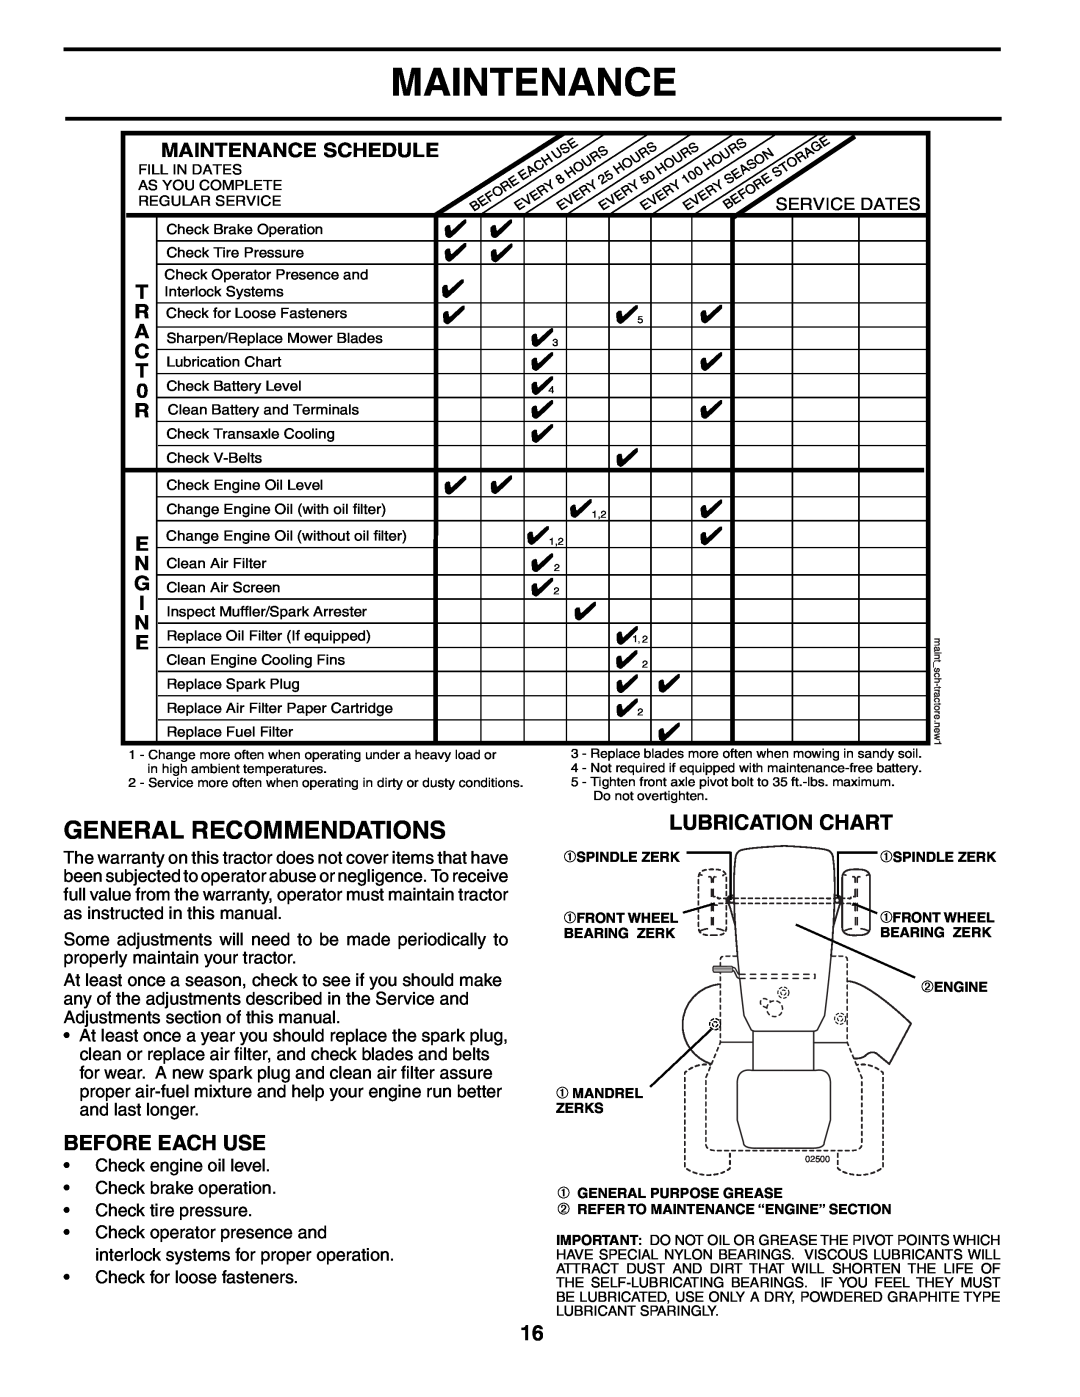 Poulan PD25PH48STA owner manual General Recommendations, Lubrication Chart, Before Each Use, Maintenance Schedule 